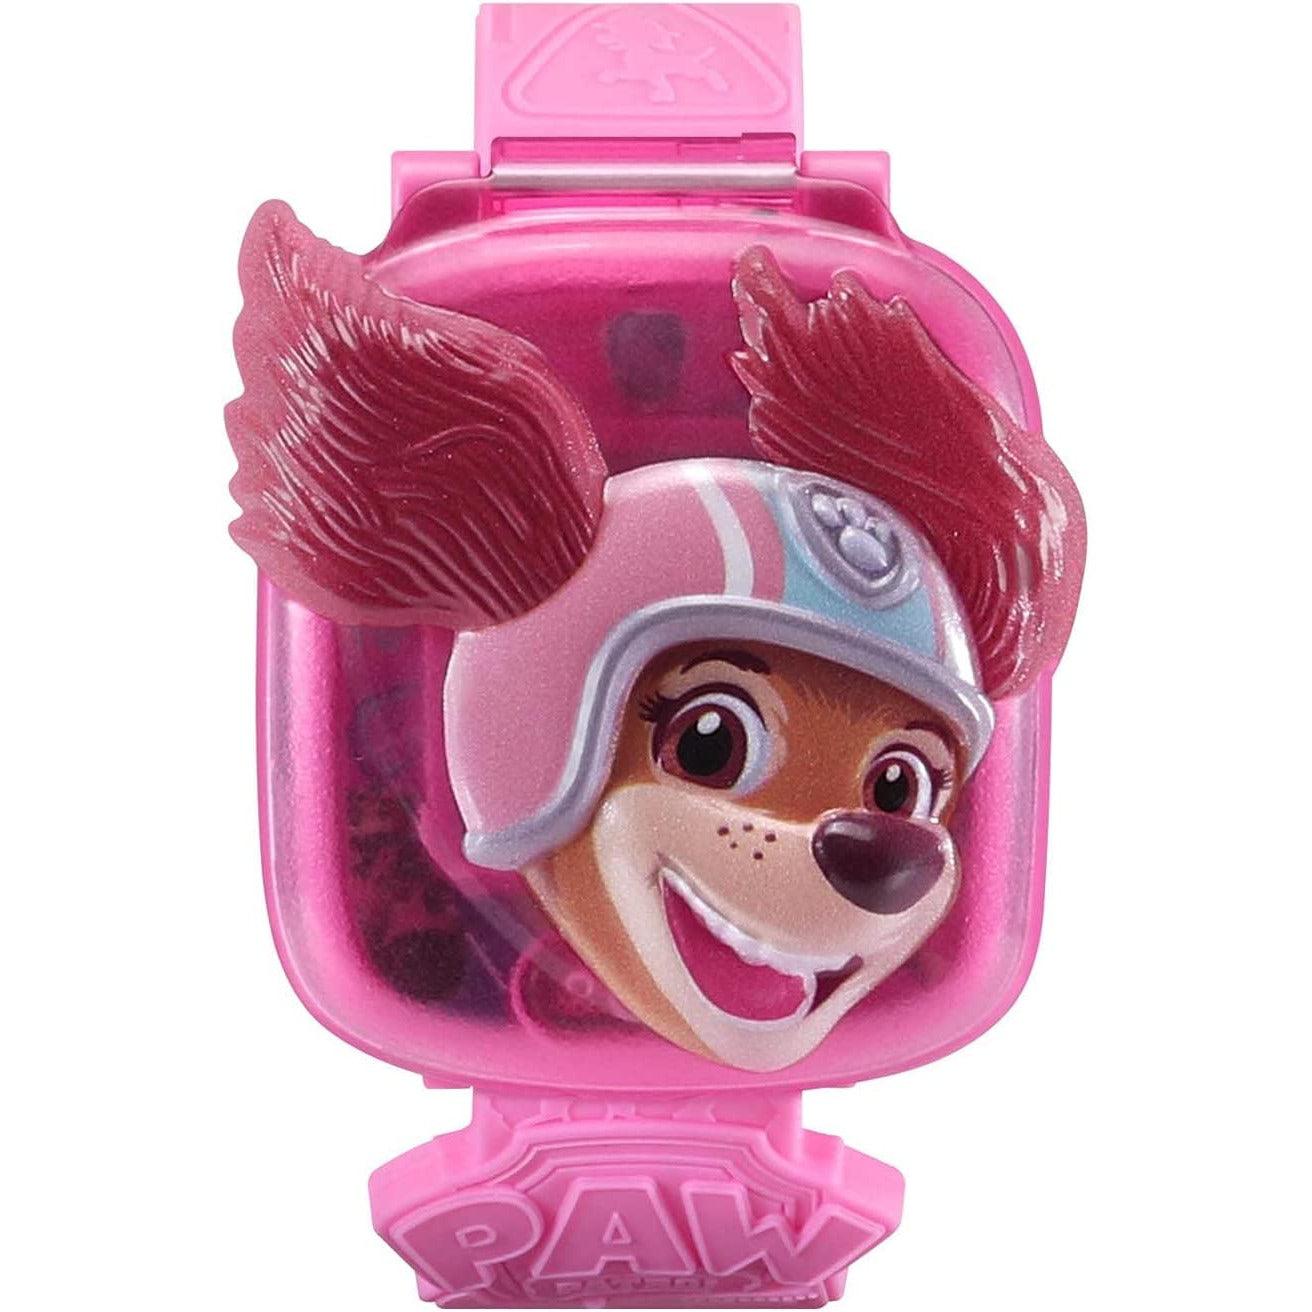 VTech PAW Patrol - The Movie: Learning Watch, Liberty - BumbleToys - 2-4 Years, 5-7 Years, Kids, Paw Patrol, Pre-Order, Watch